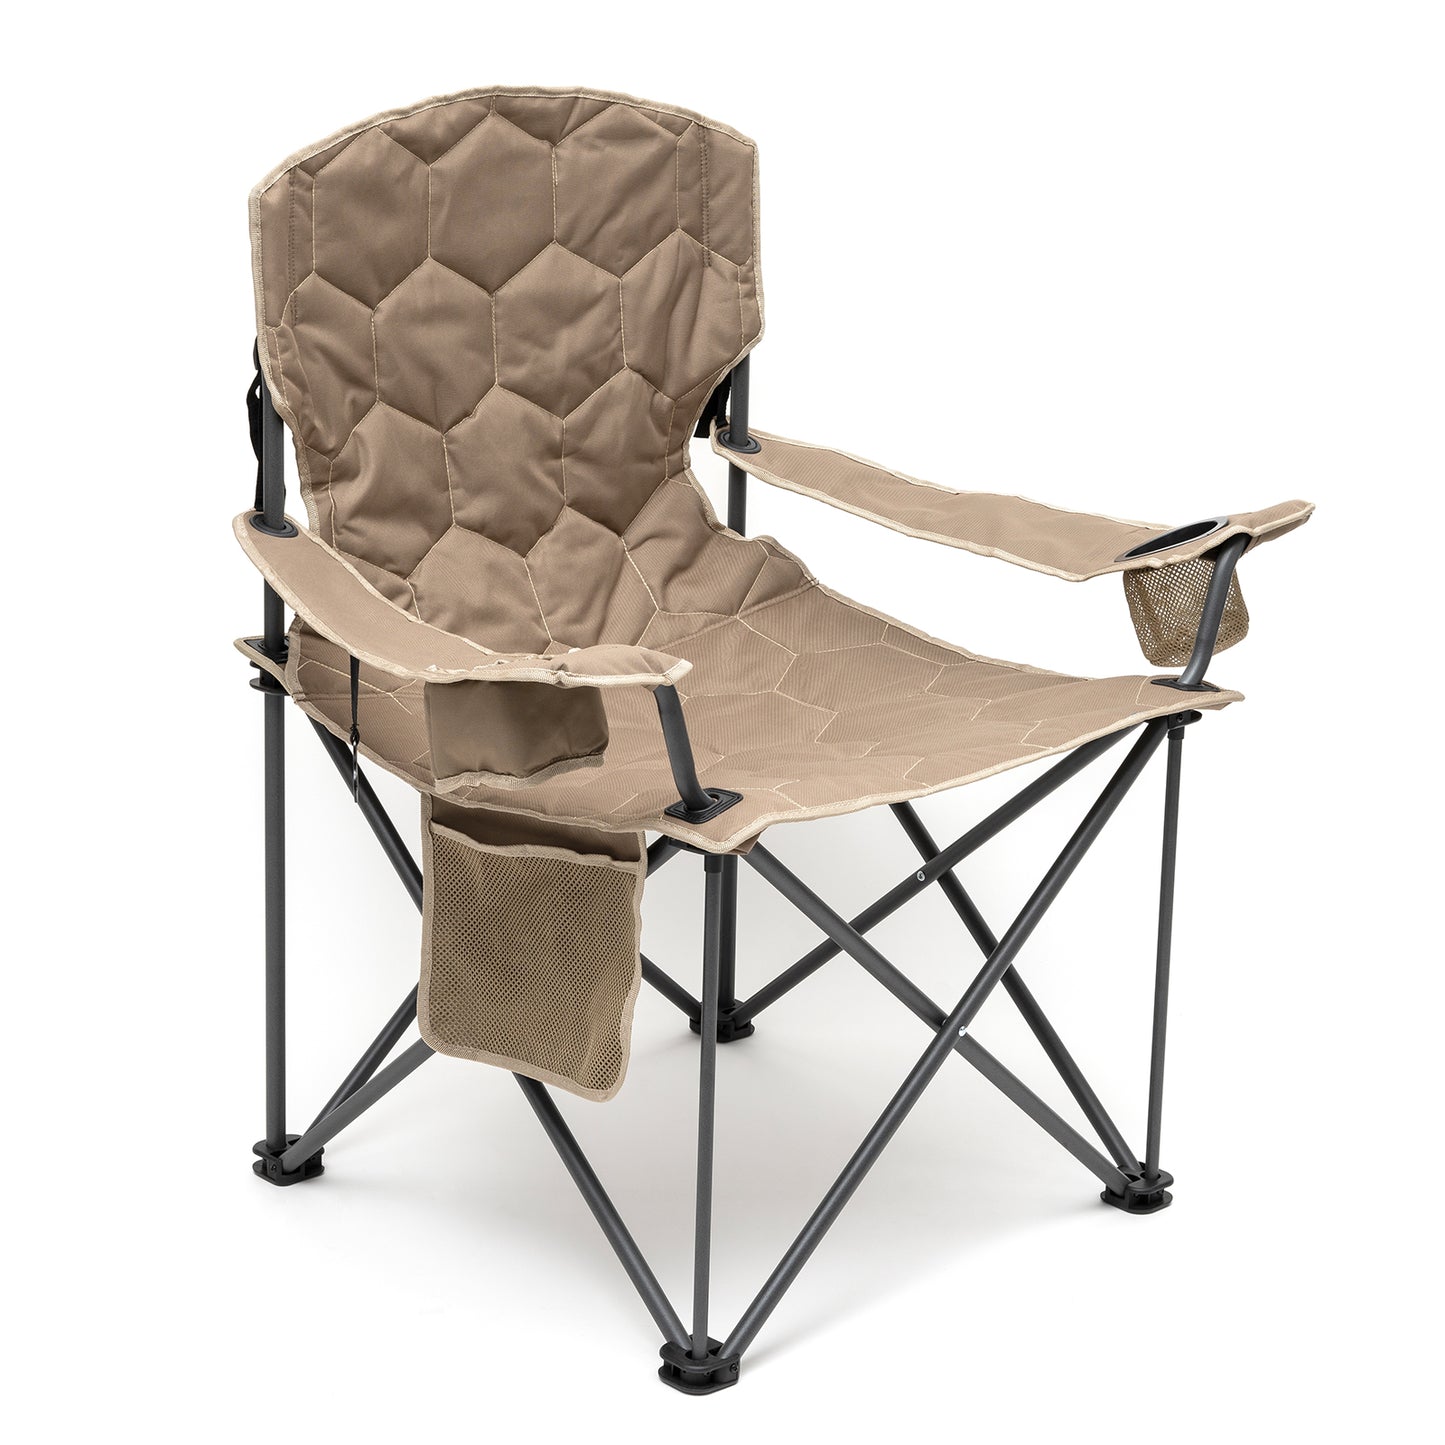 SunnyFeel AC2002E Giant Camping Chair